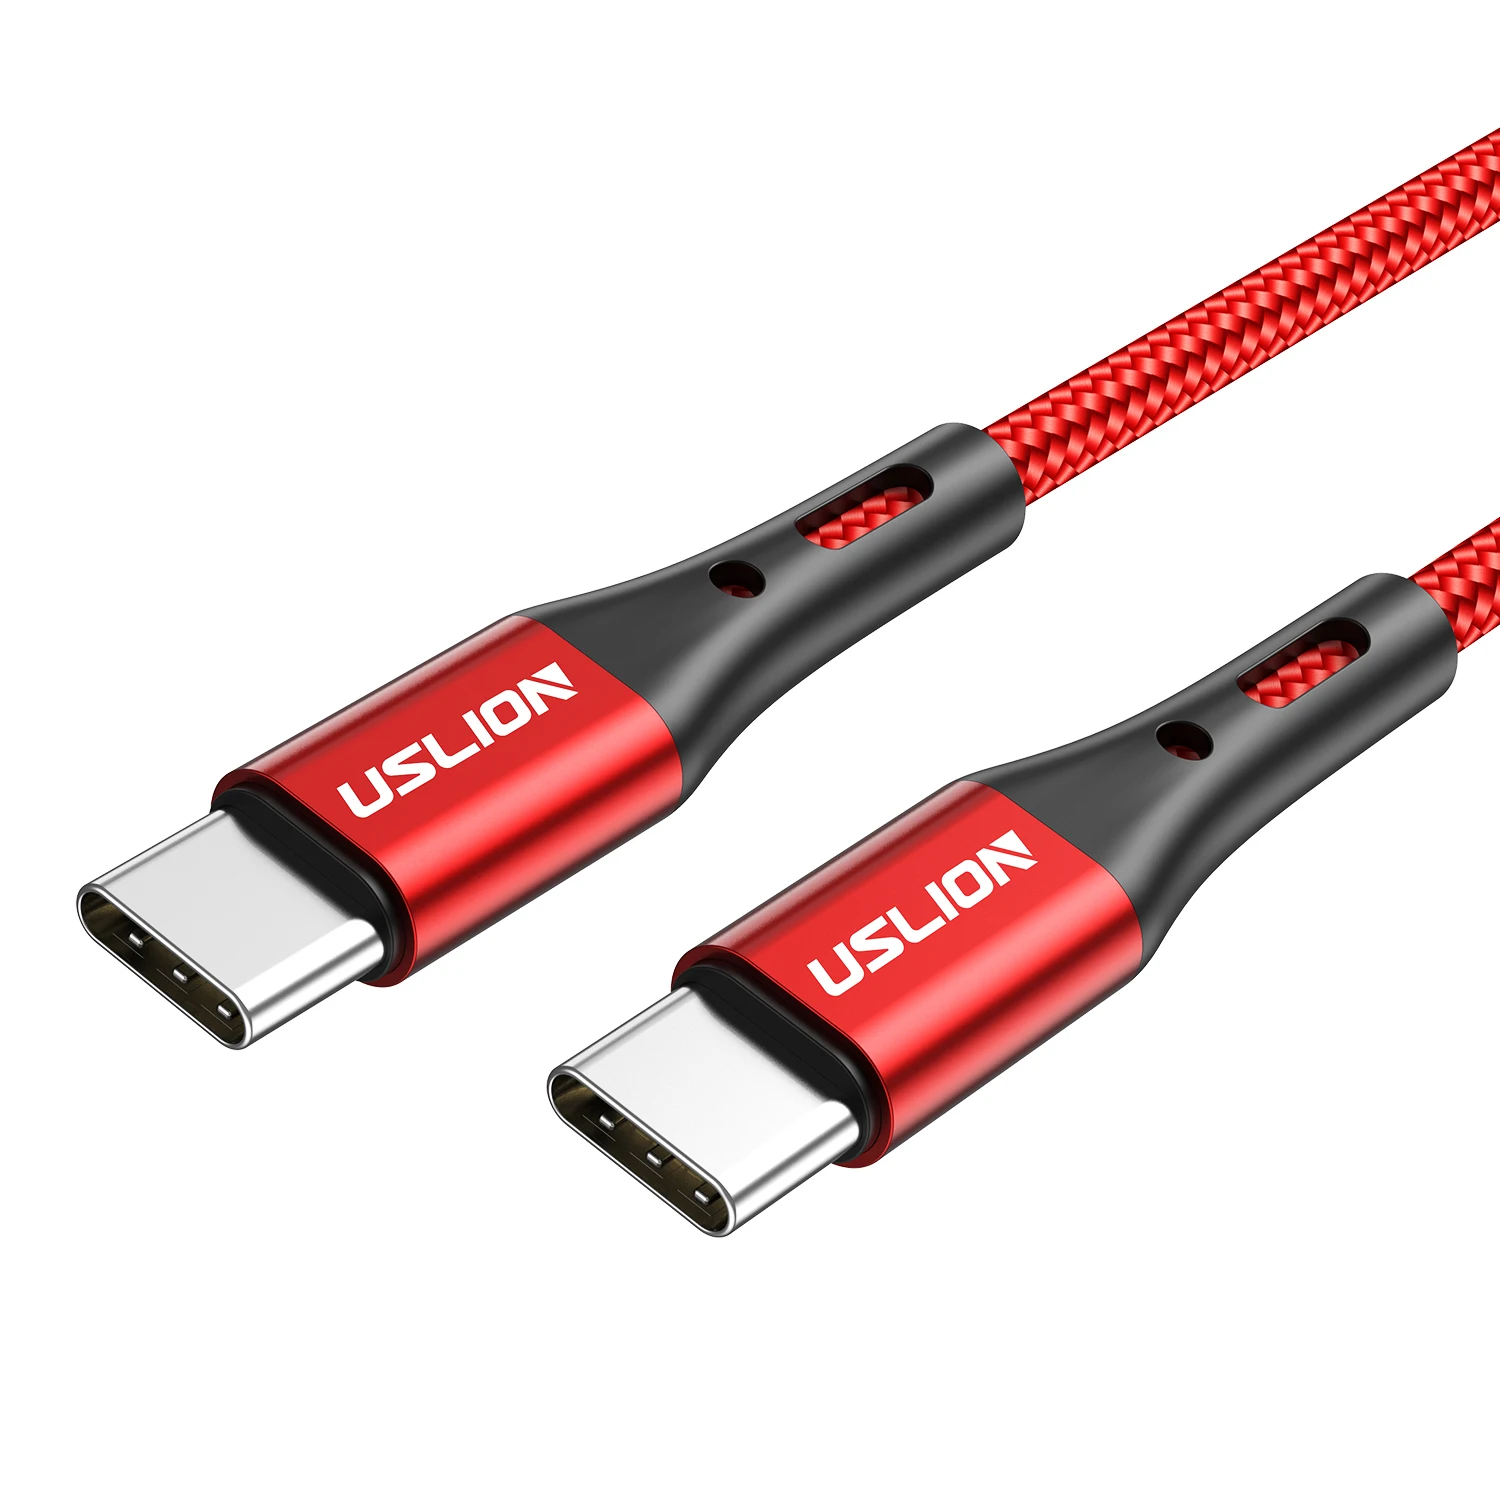 USLION USB C to Type C Cable Fast Charging 60W PD Cable QC 3.0 Quick Charging Mobile Phone Charging Wire USB C Data Cable phone charger cord Cables